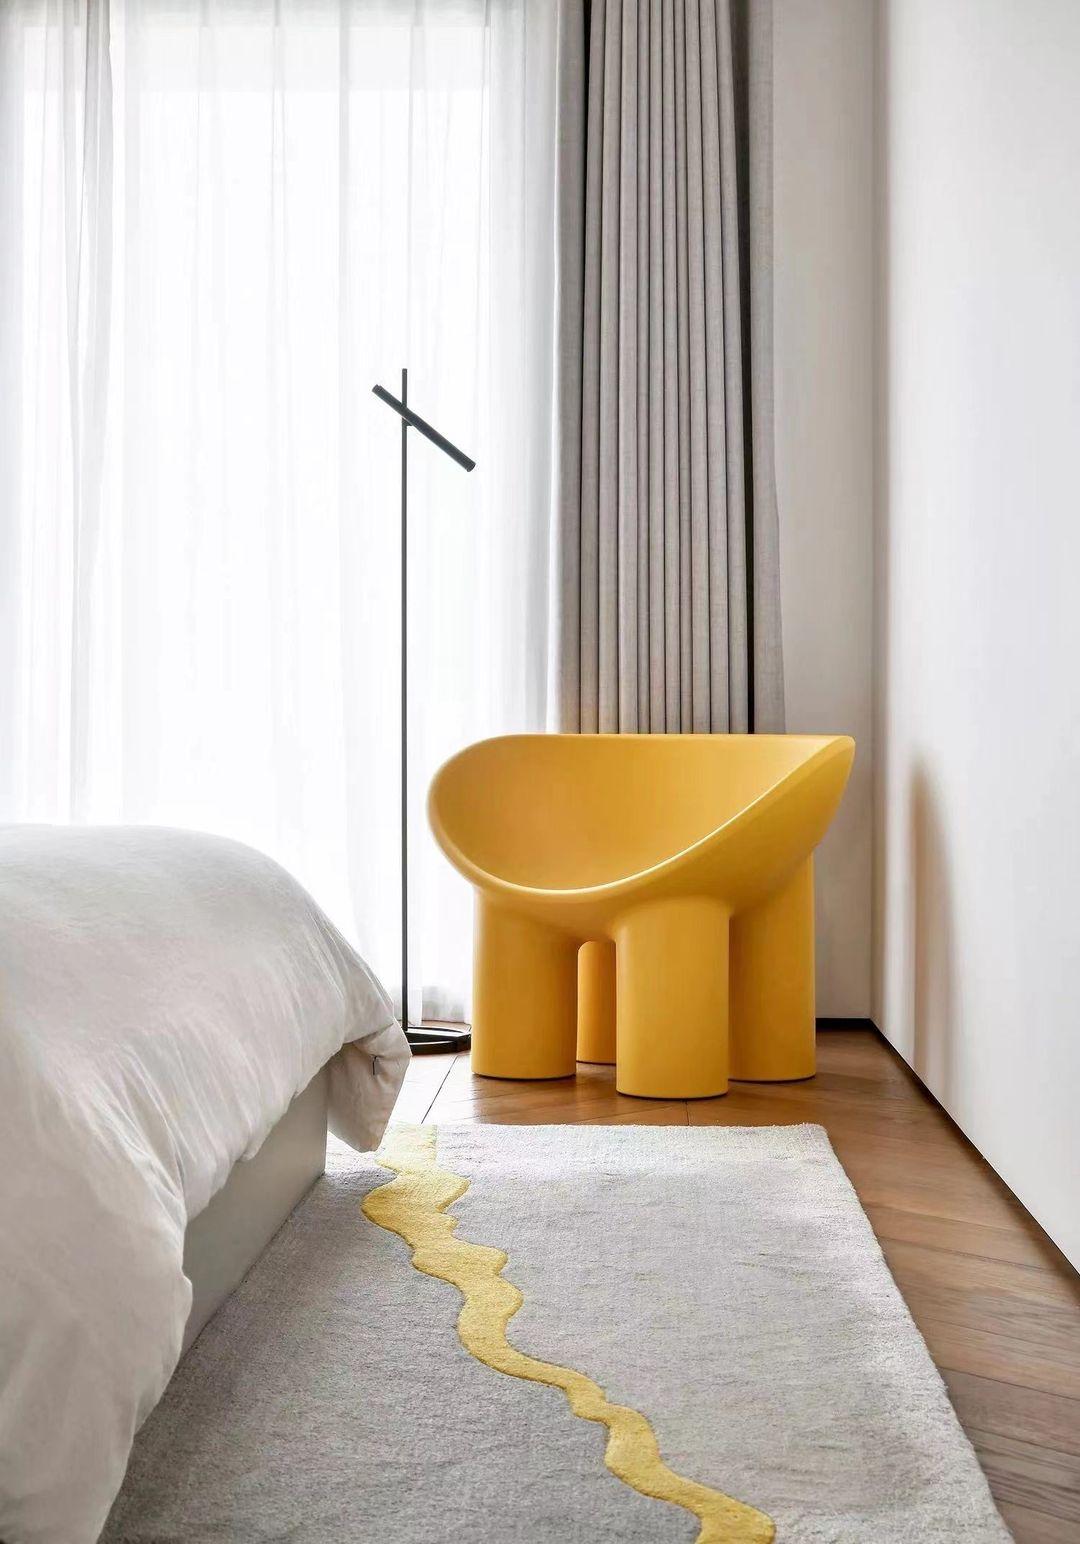 Italian In Stock Roly Poly Armchair Ochre by Driade, Faye Toogood